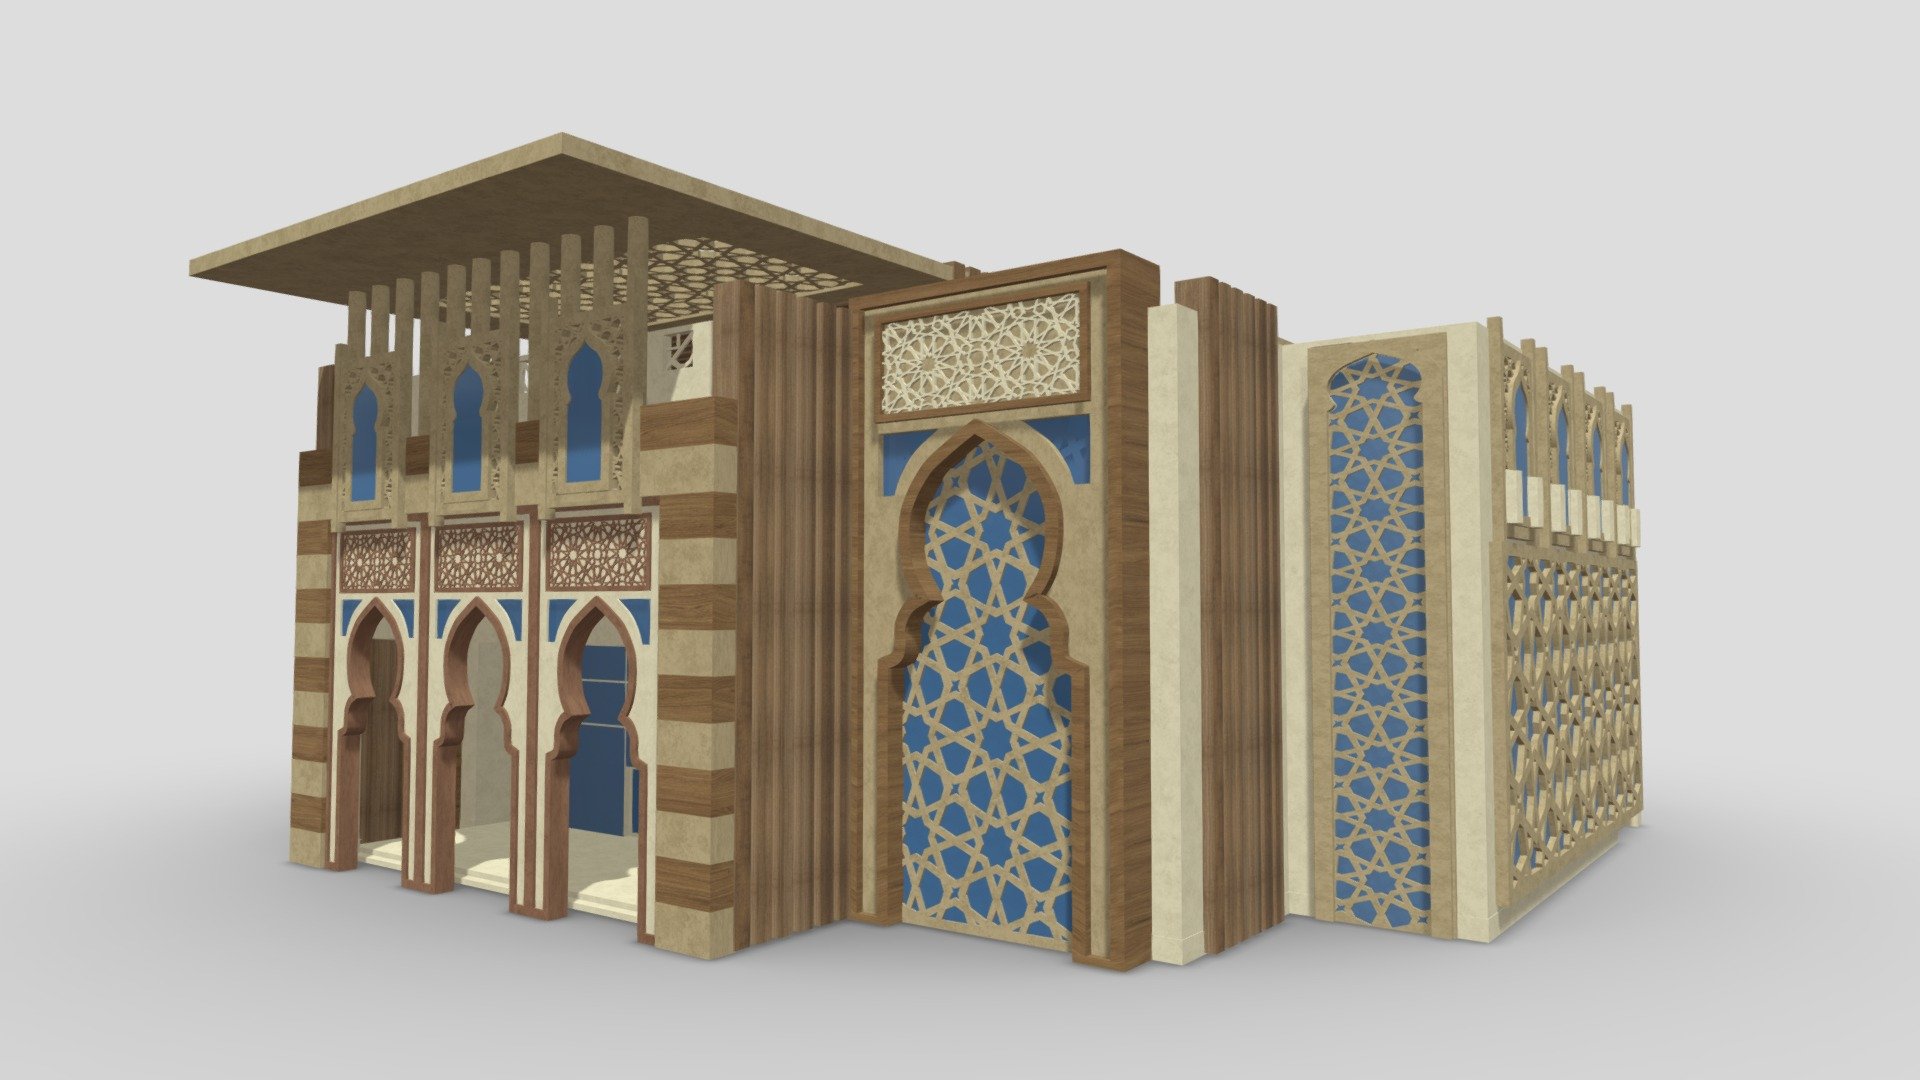 0164 - Islamic Facade Building.

Native Format File: 3Ds Max 2020 - Rendering by Vray Next.

3Ds Max Save as 3Ds Max 2017 with Converted all objects to Editable Poly.

3Ds Max Save as 3Ds Max 2020 ( Standard Materials ) with Converted all objects to Editable Poly.

Blender format file is available.

Exporting Formats: Autodesk FBX ( .fbx ), OBJ ( obj, mtl ), usdz, glb, gltf.

All 17 texture maps are included as JPG.

Support 24/7 3d model